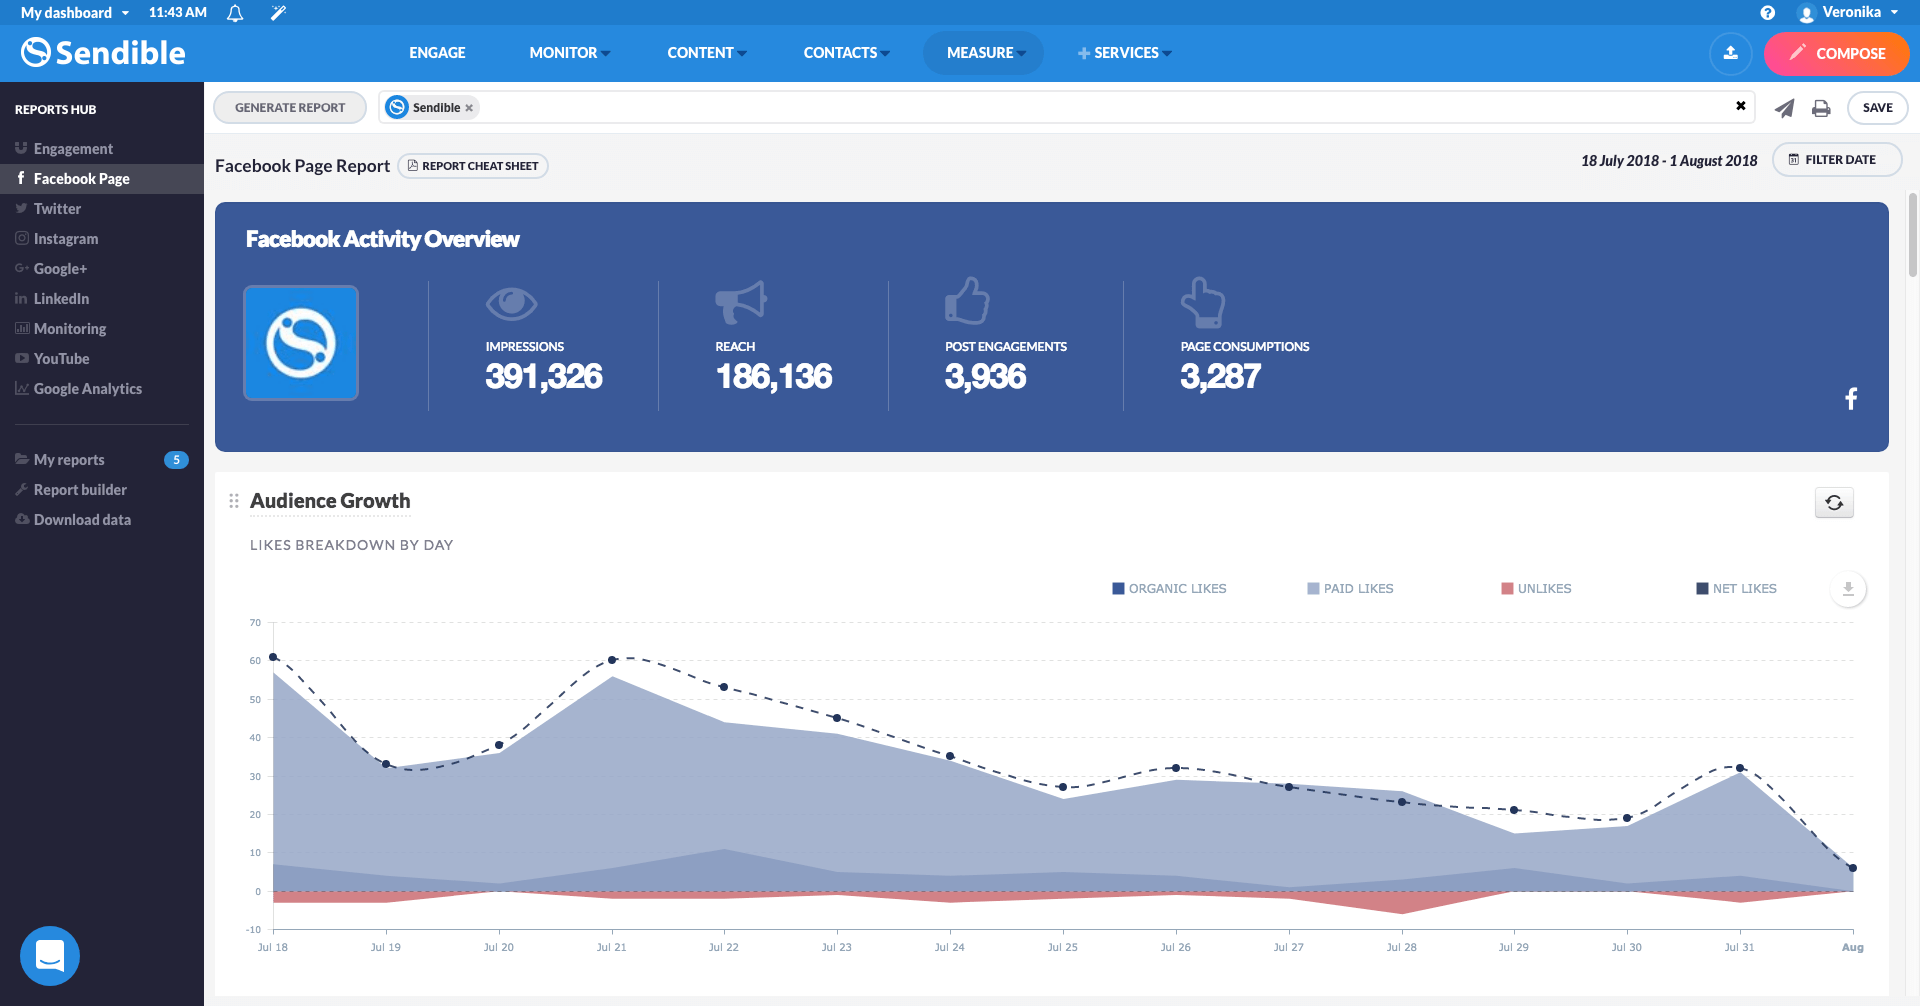 Reports Hub - Facebook Page Report